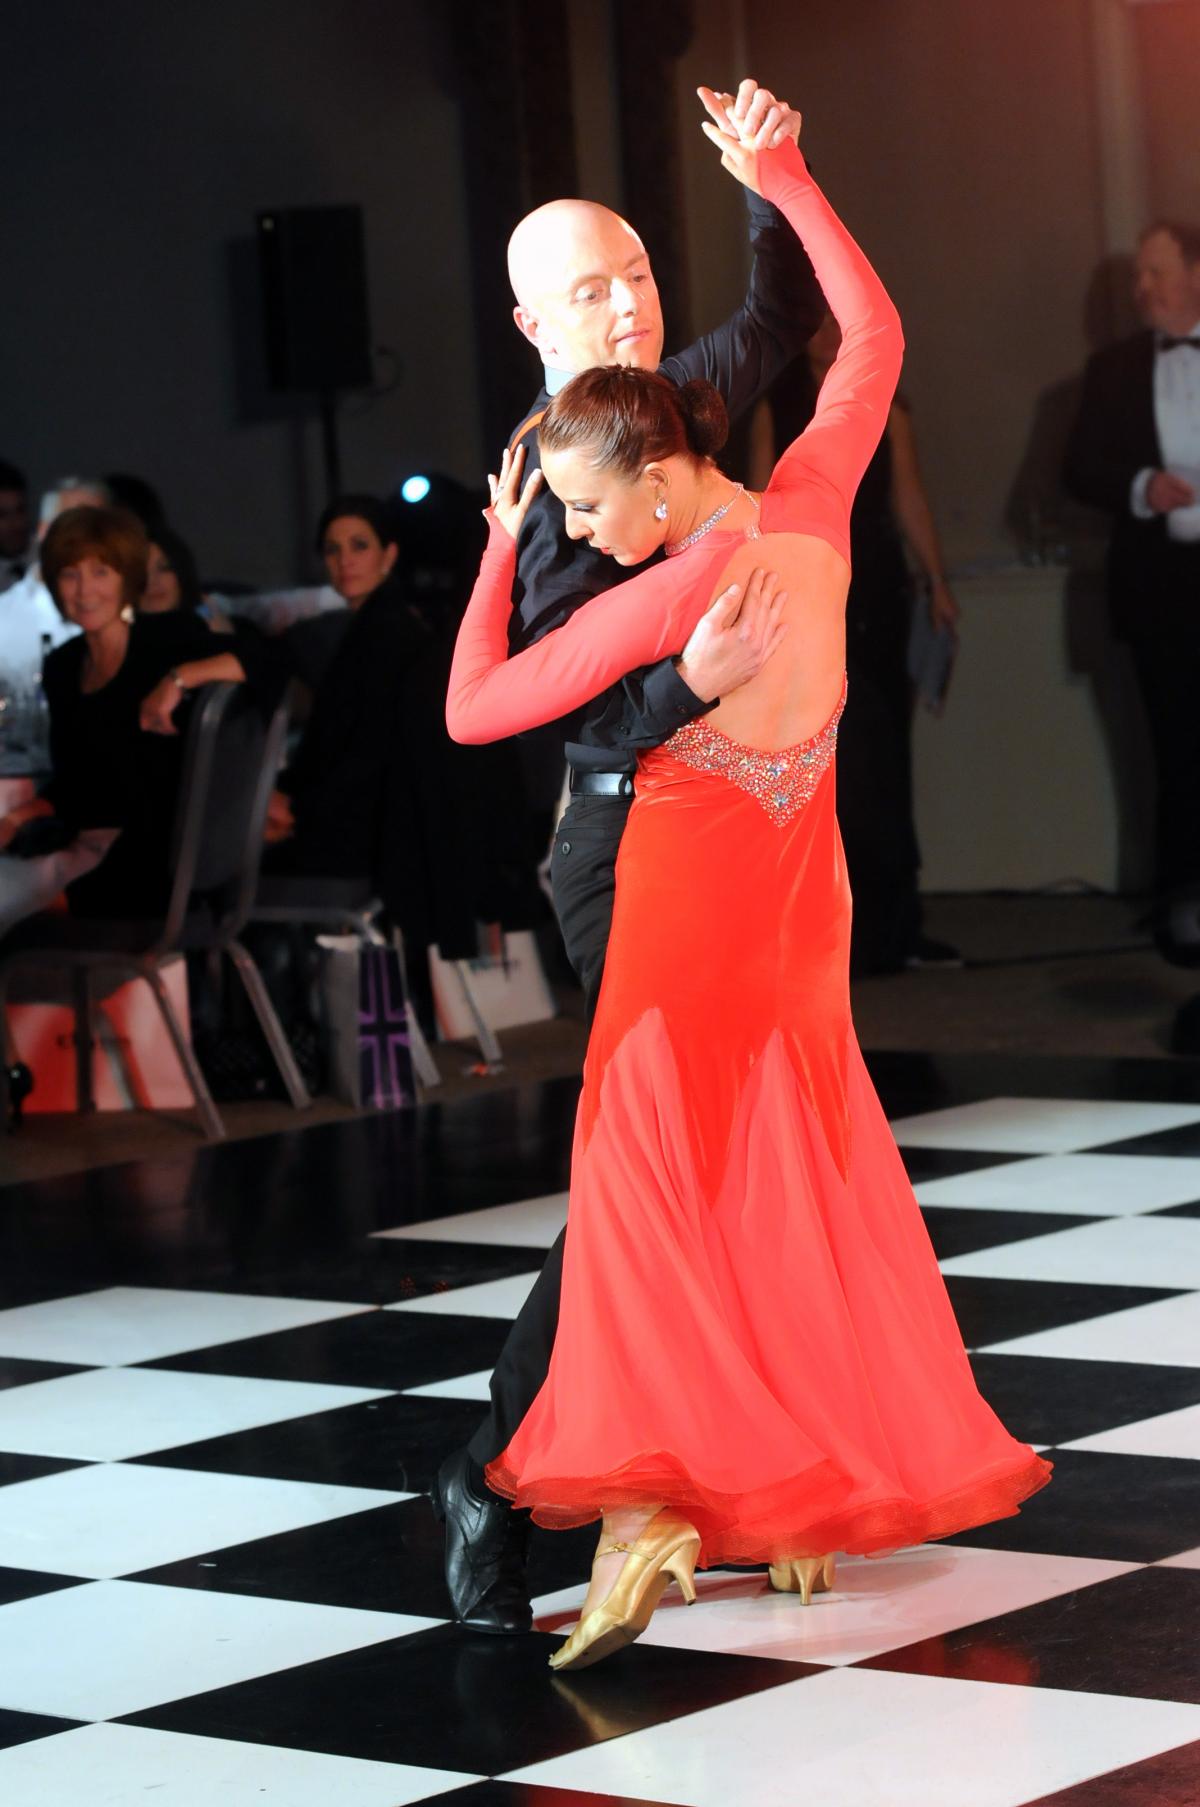 Gary Cookson performing his Argentine tango